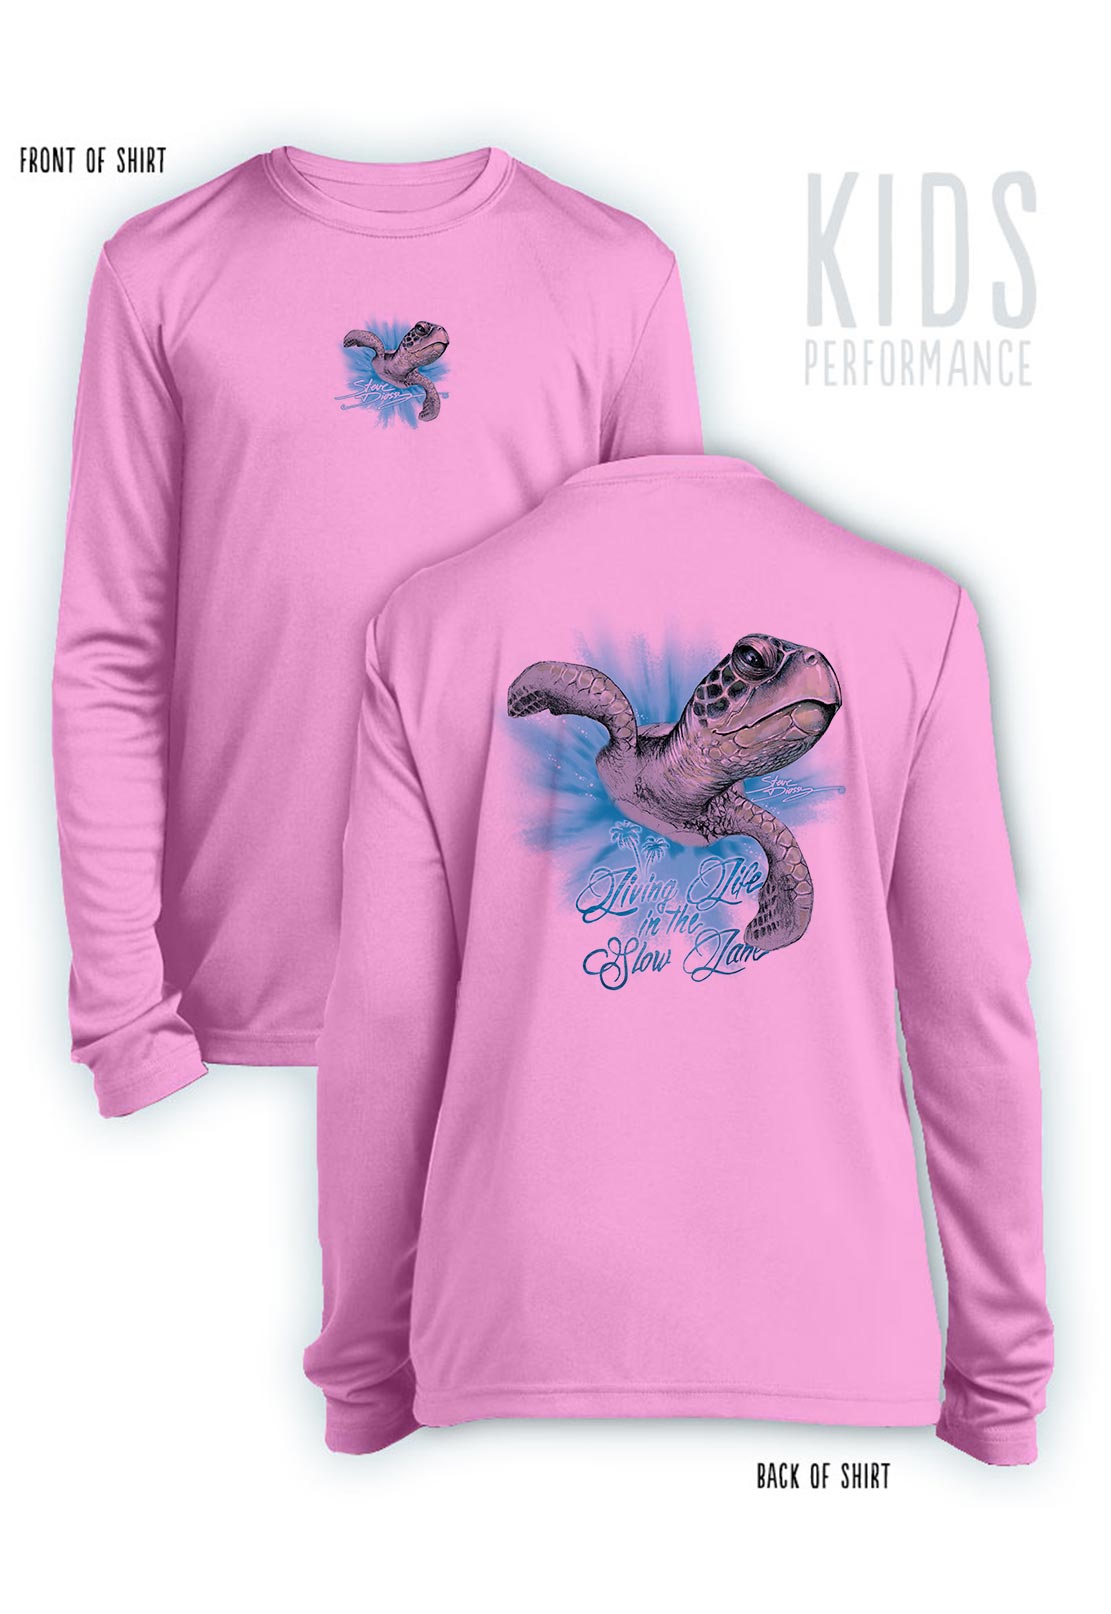 Take It Easy Turtle- KIDS Long Sleeve Performance - 100% Polyester